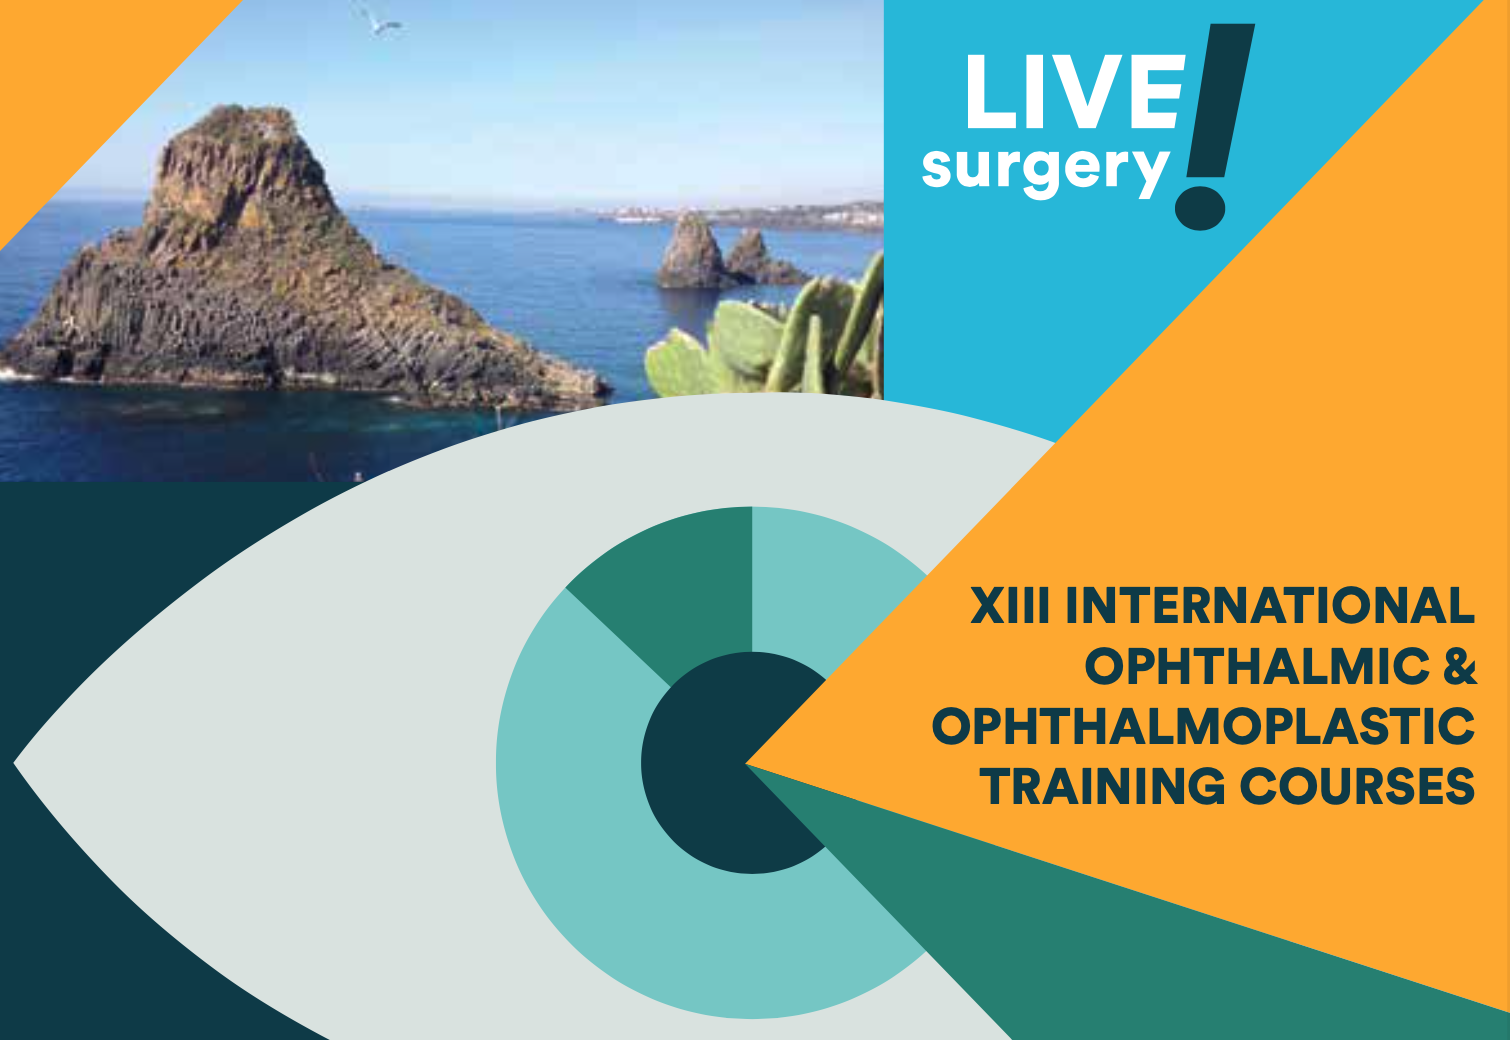 XIII
                                                                        INTERNATIONAL
                                                                        OPHTHALMIC
                                                                        &
                                                                        OPHTHALMOPLASTIC
                                                                        TRAINING
                                                                        COURSES